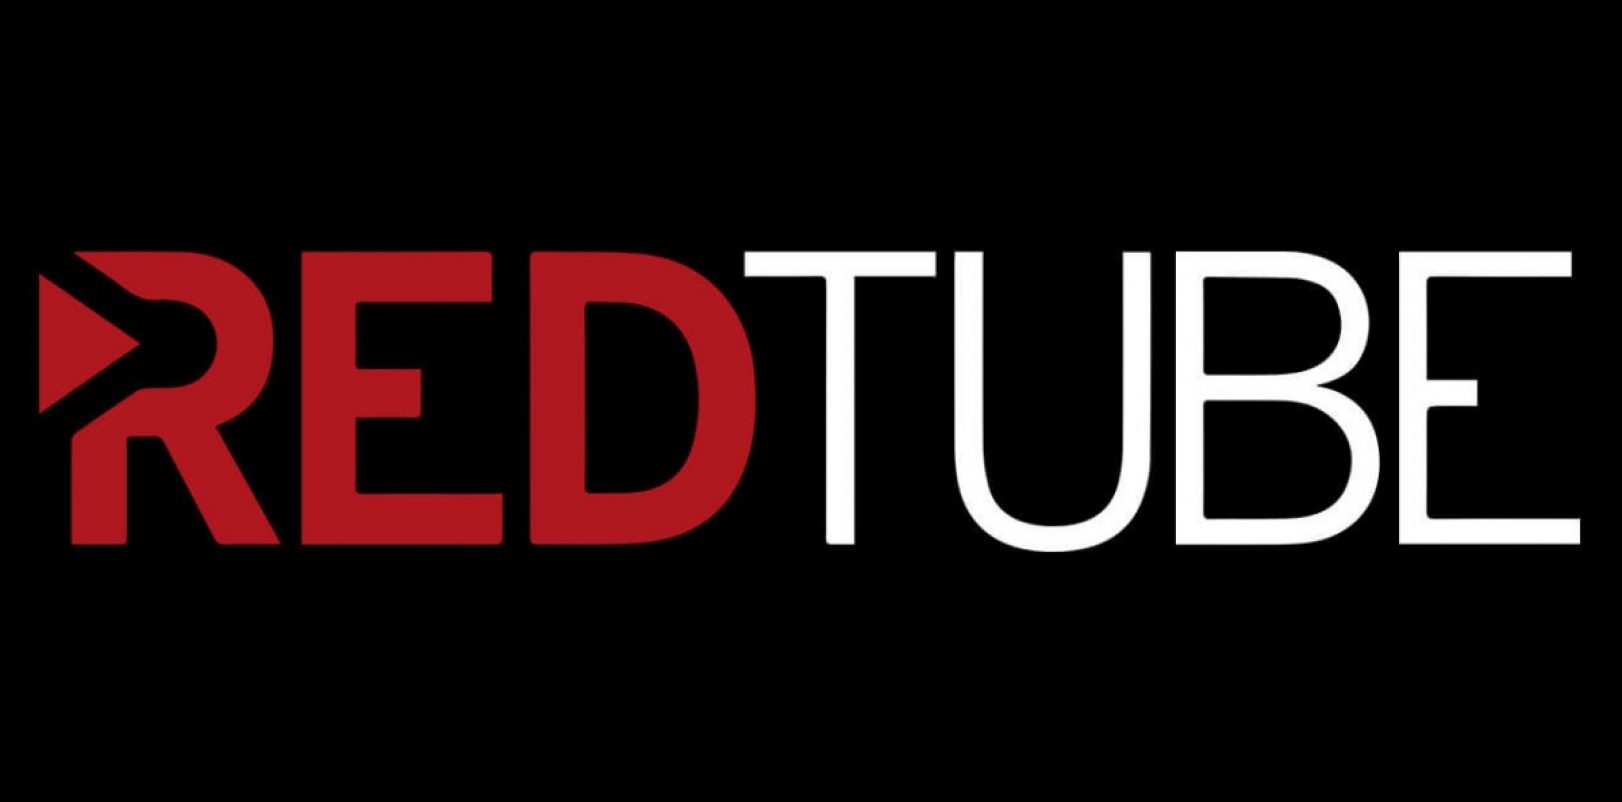 How to Unblock RedTube Without Being Caught? - Best 10 VPN Reviews